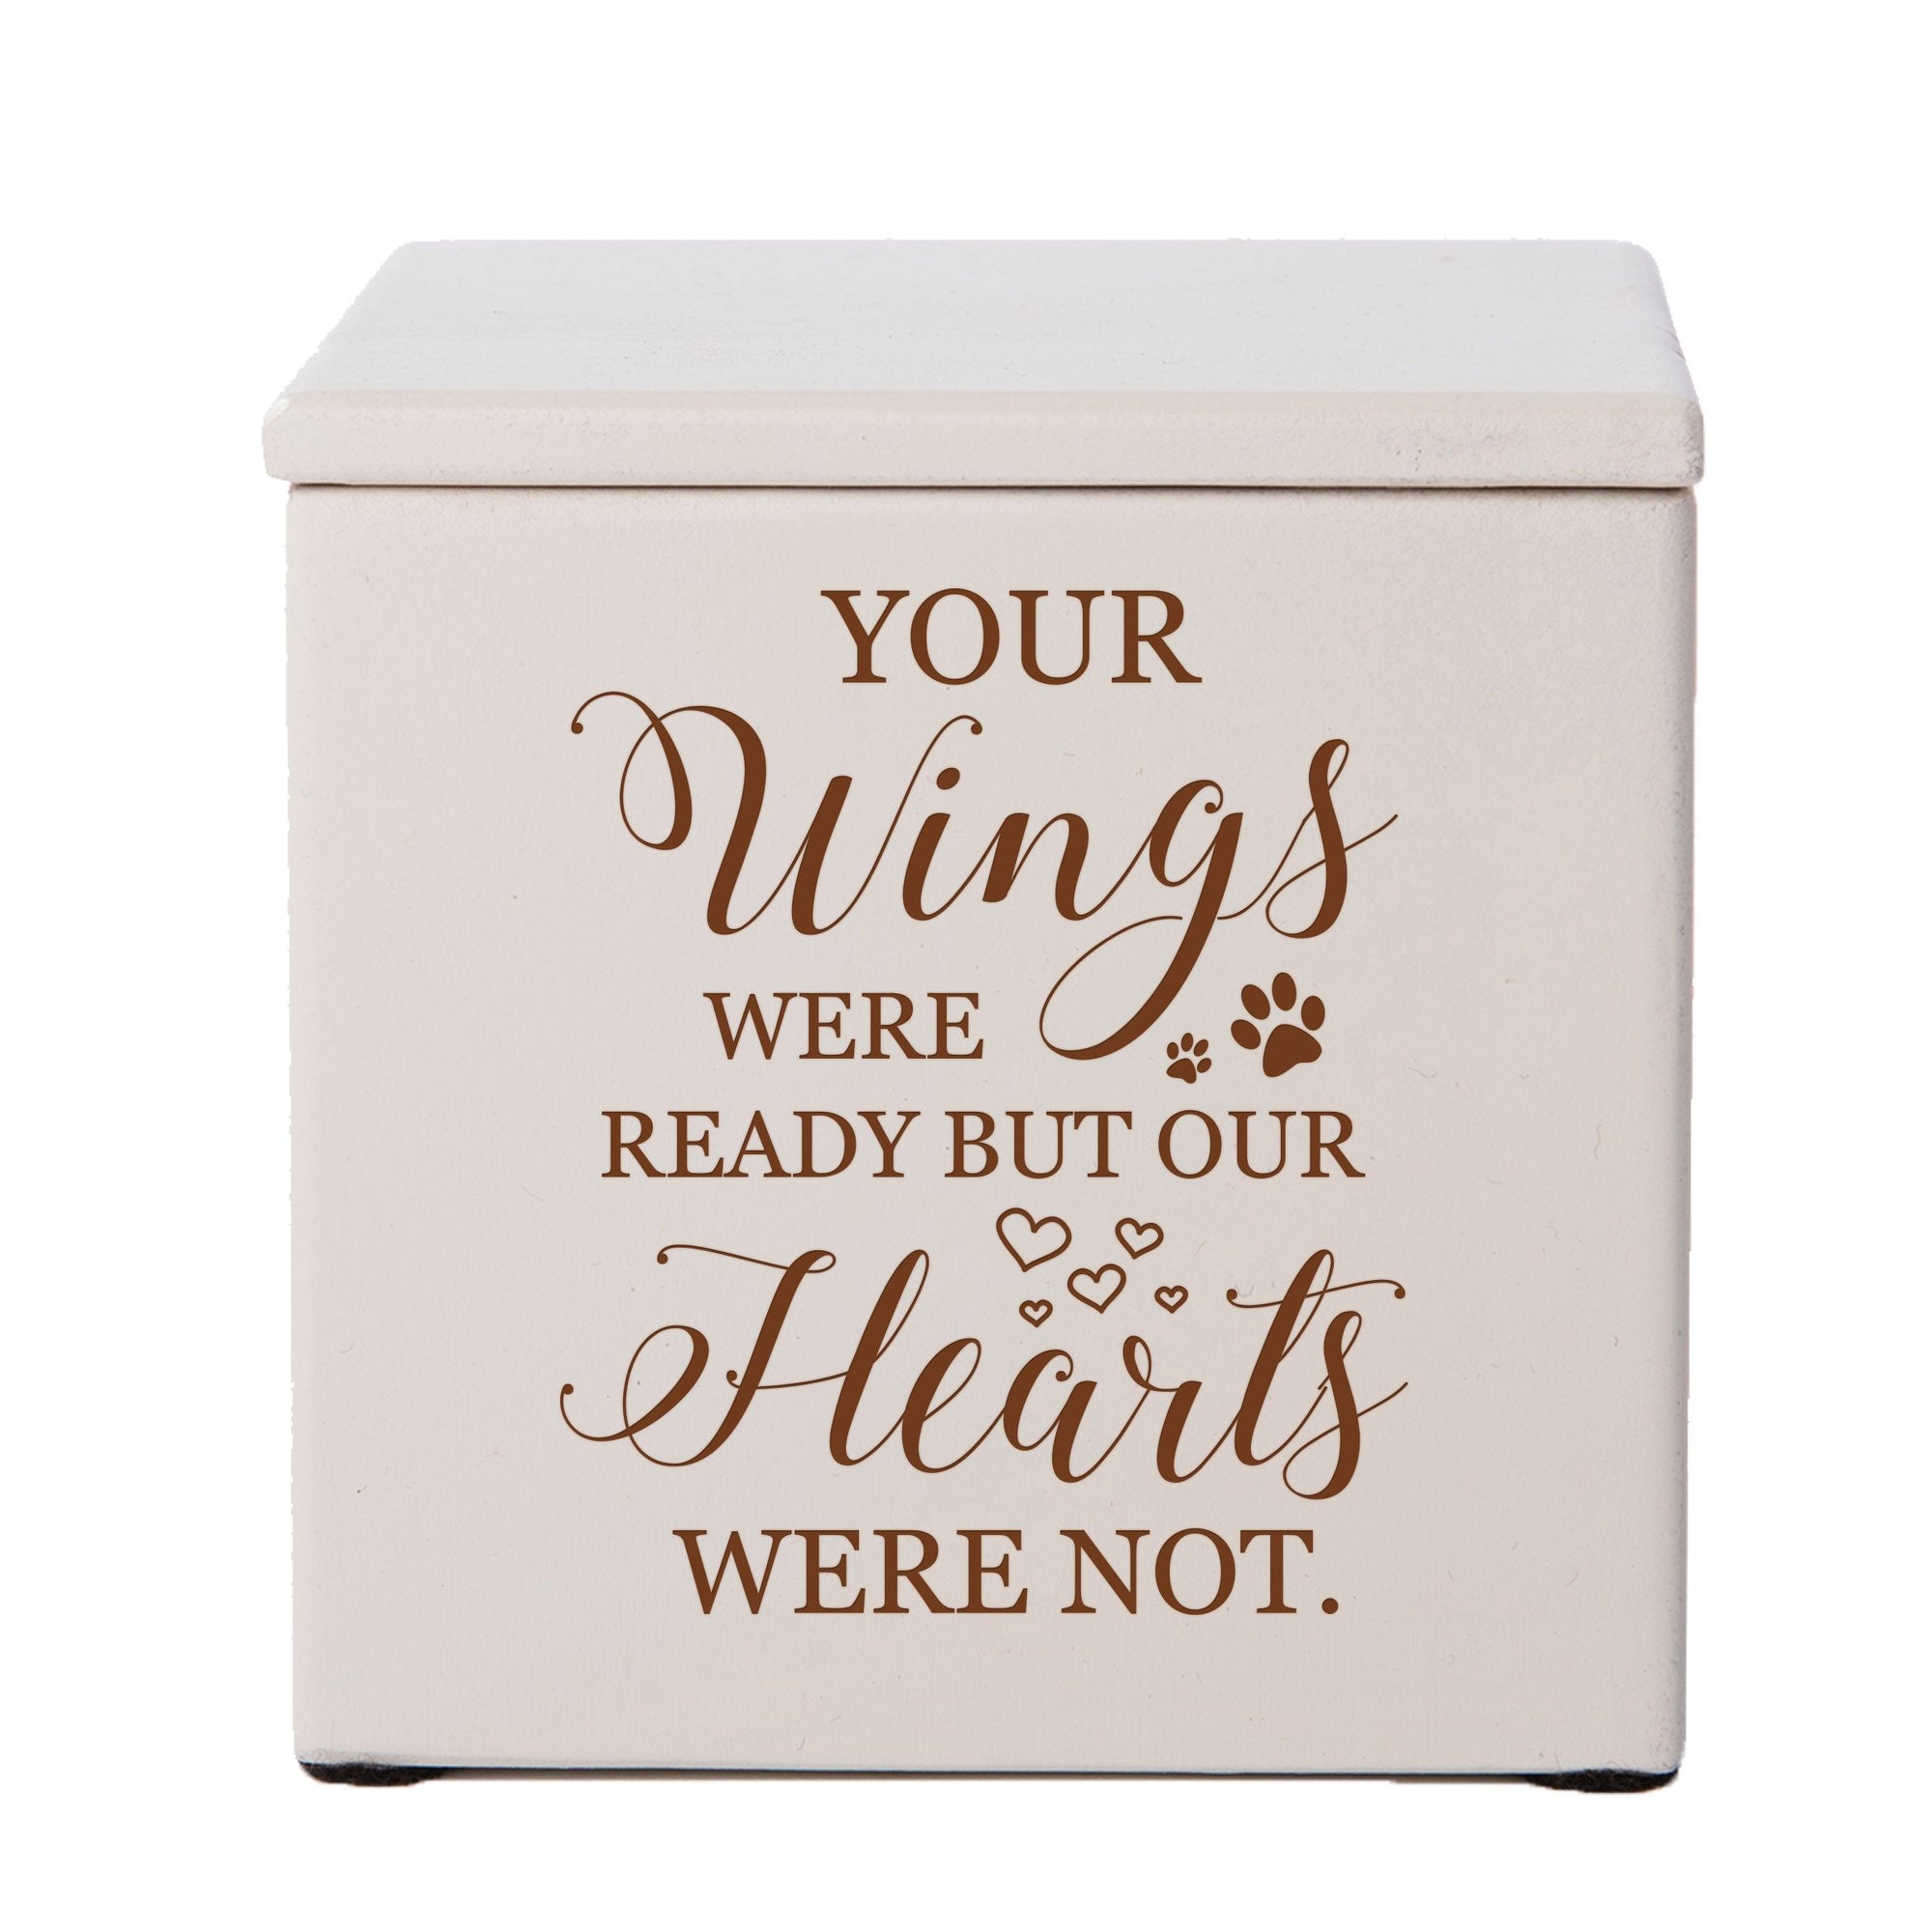 Ivory Pet Memorial 3.5x3.5 Keepsake Urn with phrase "Your Memory Is A Beautiful Joy"